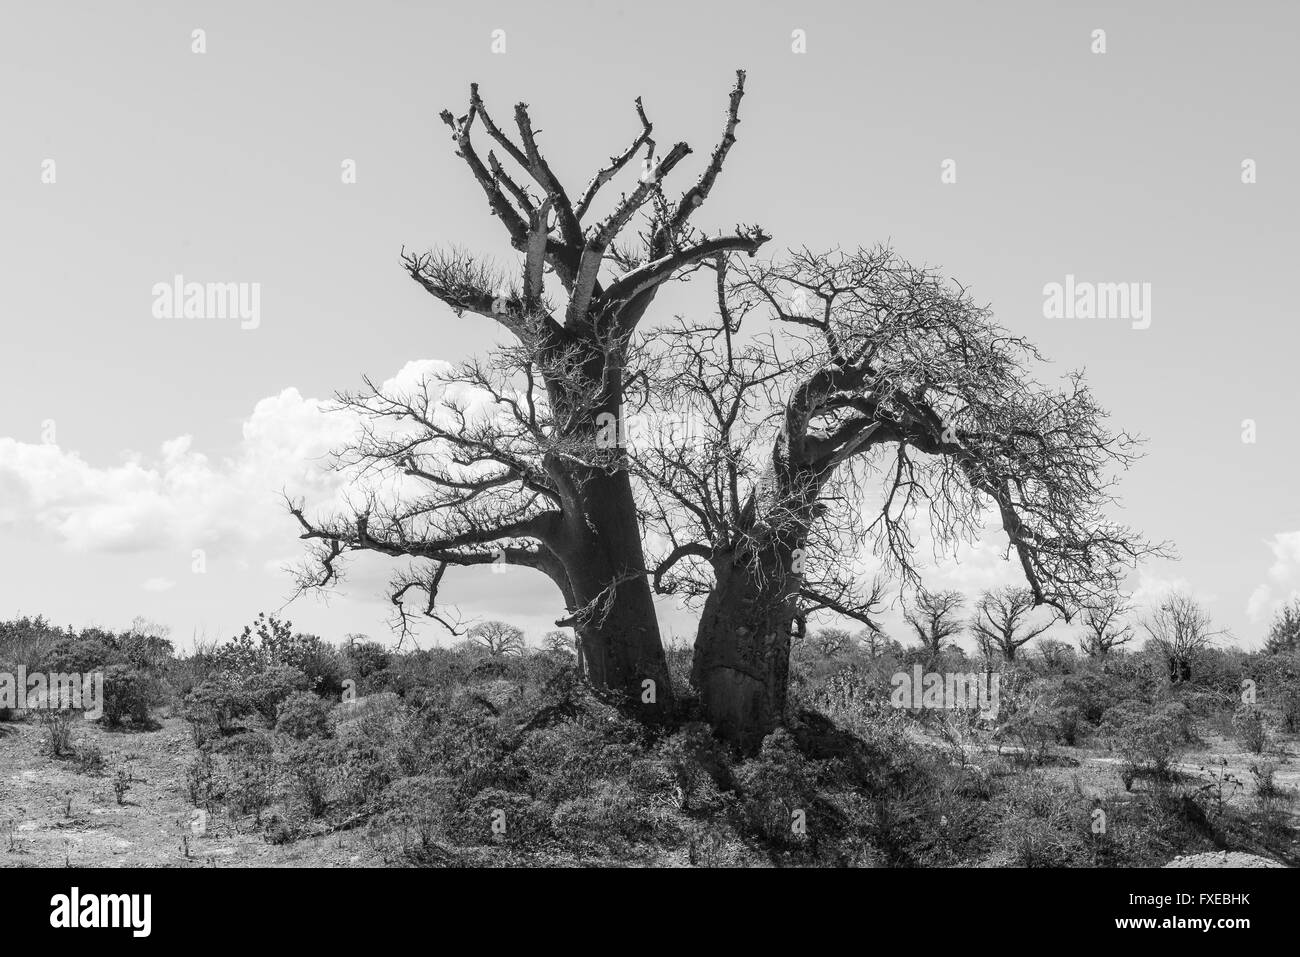 Big baobab tree growing surrounded by African Savannah. Black and white. Stock Photo